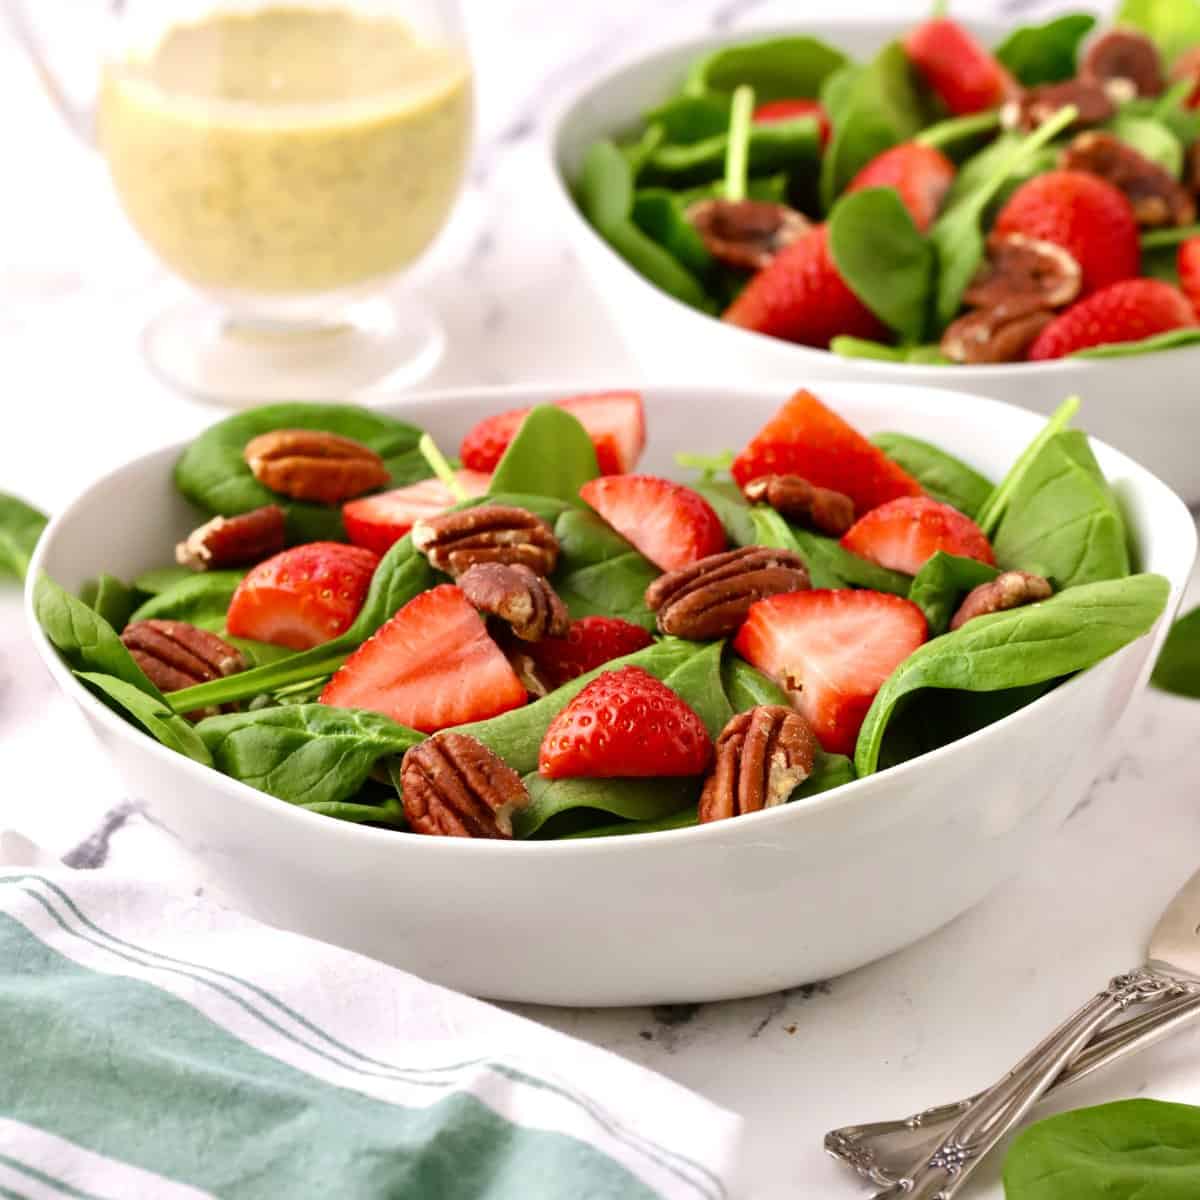 Spinach Strawberry Salad with Pecans and Poppy Seed Dressing on a table.